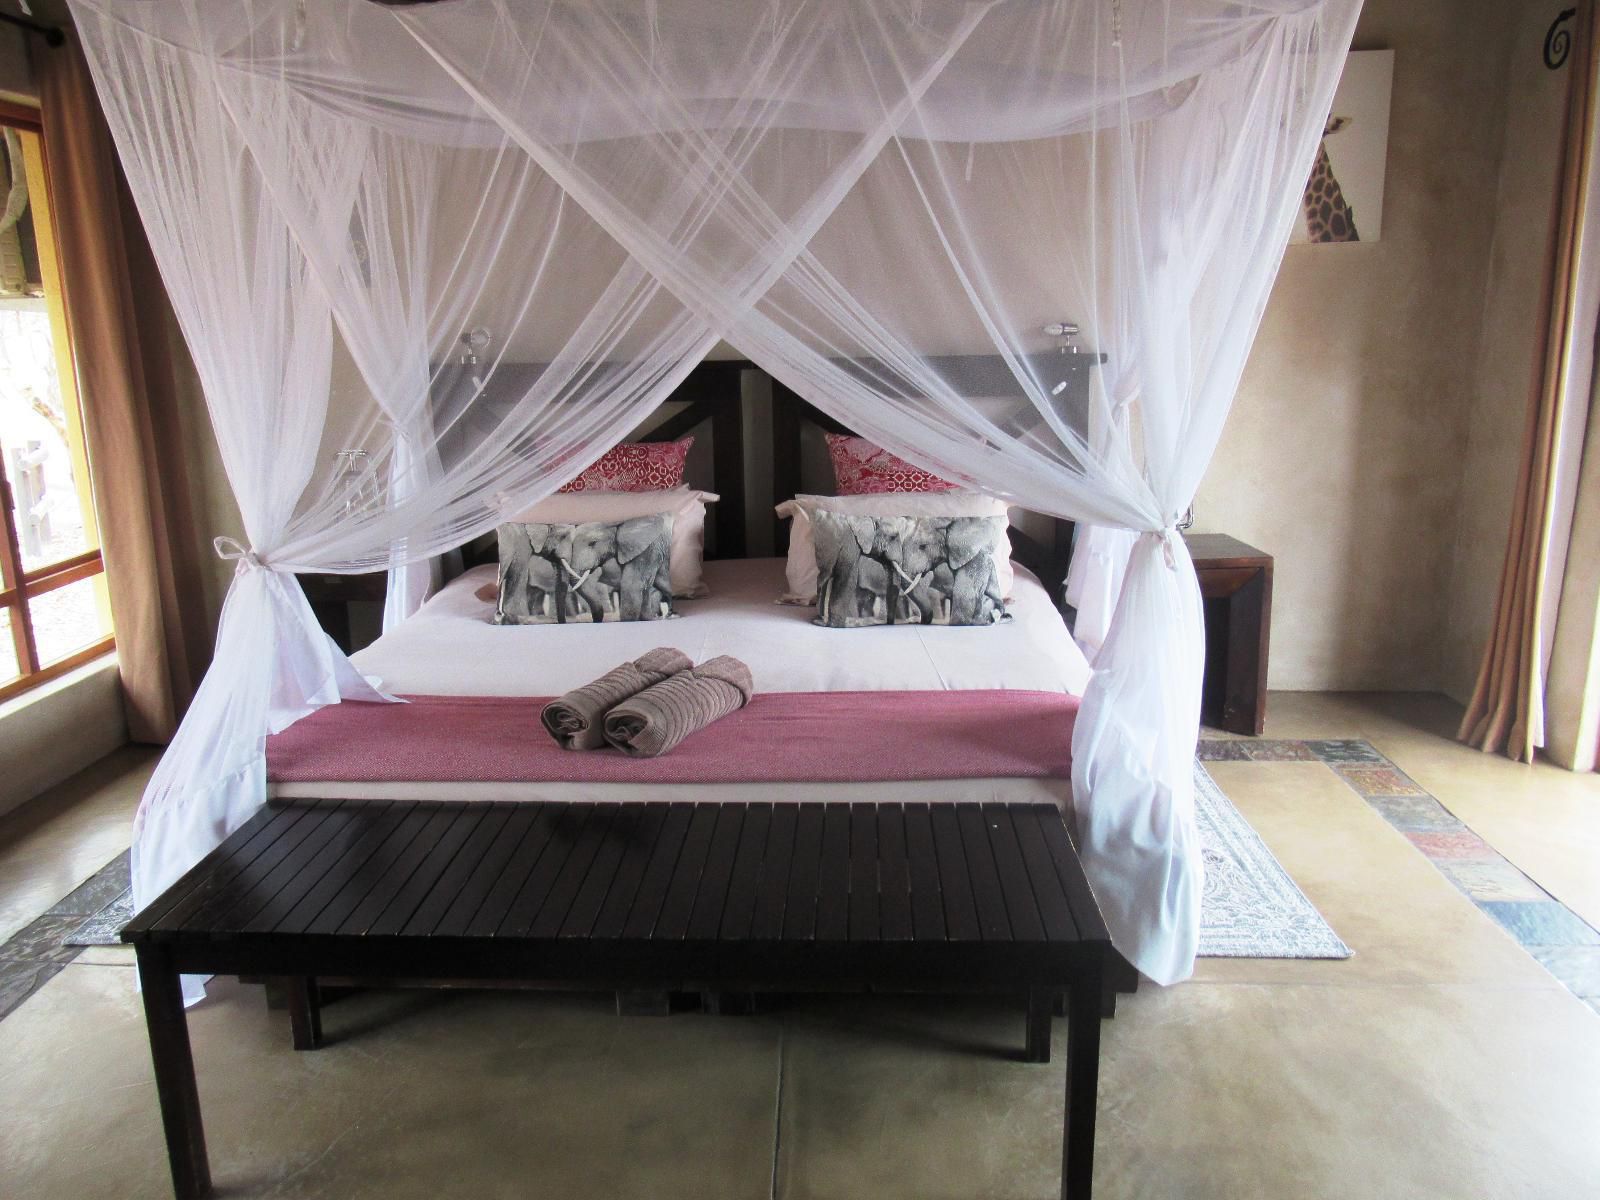 Thornhill Safari Lodge Guernsey Nature Reserve Amanda Limpopo Province South Africa Bedroom